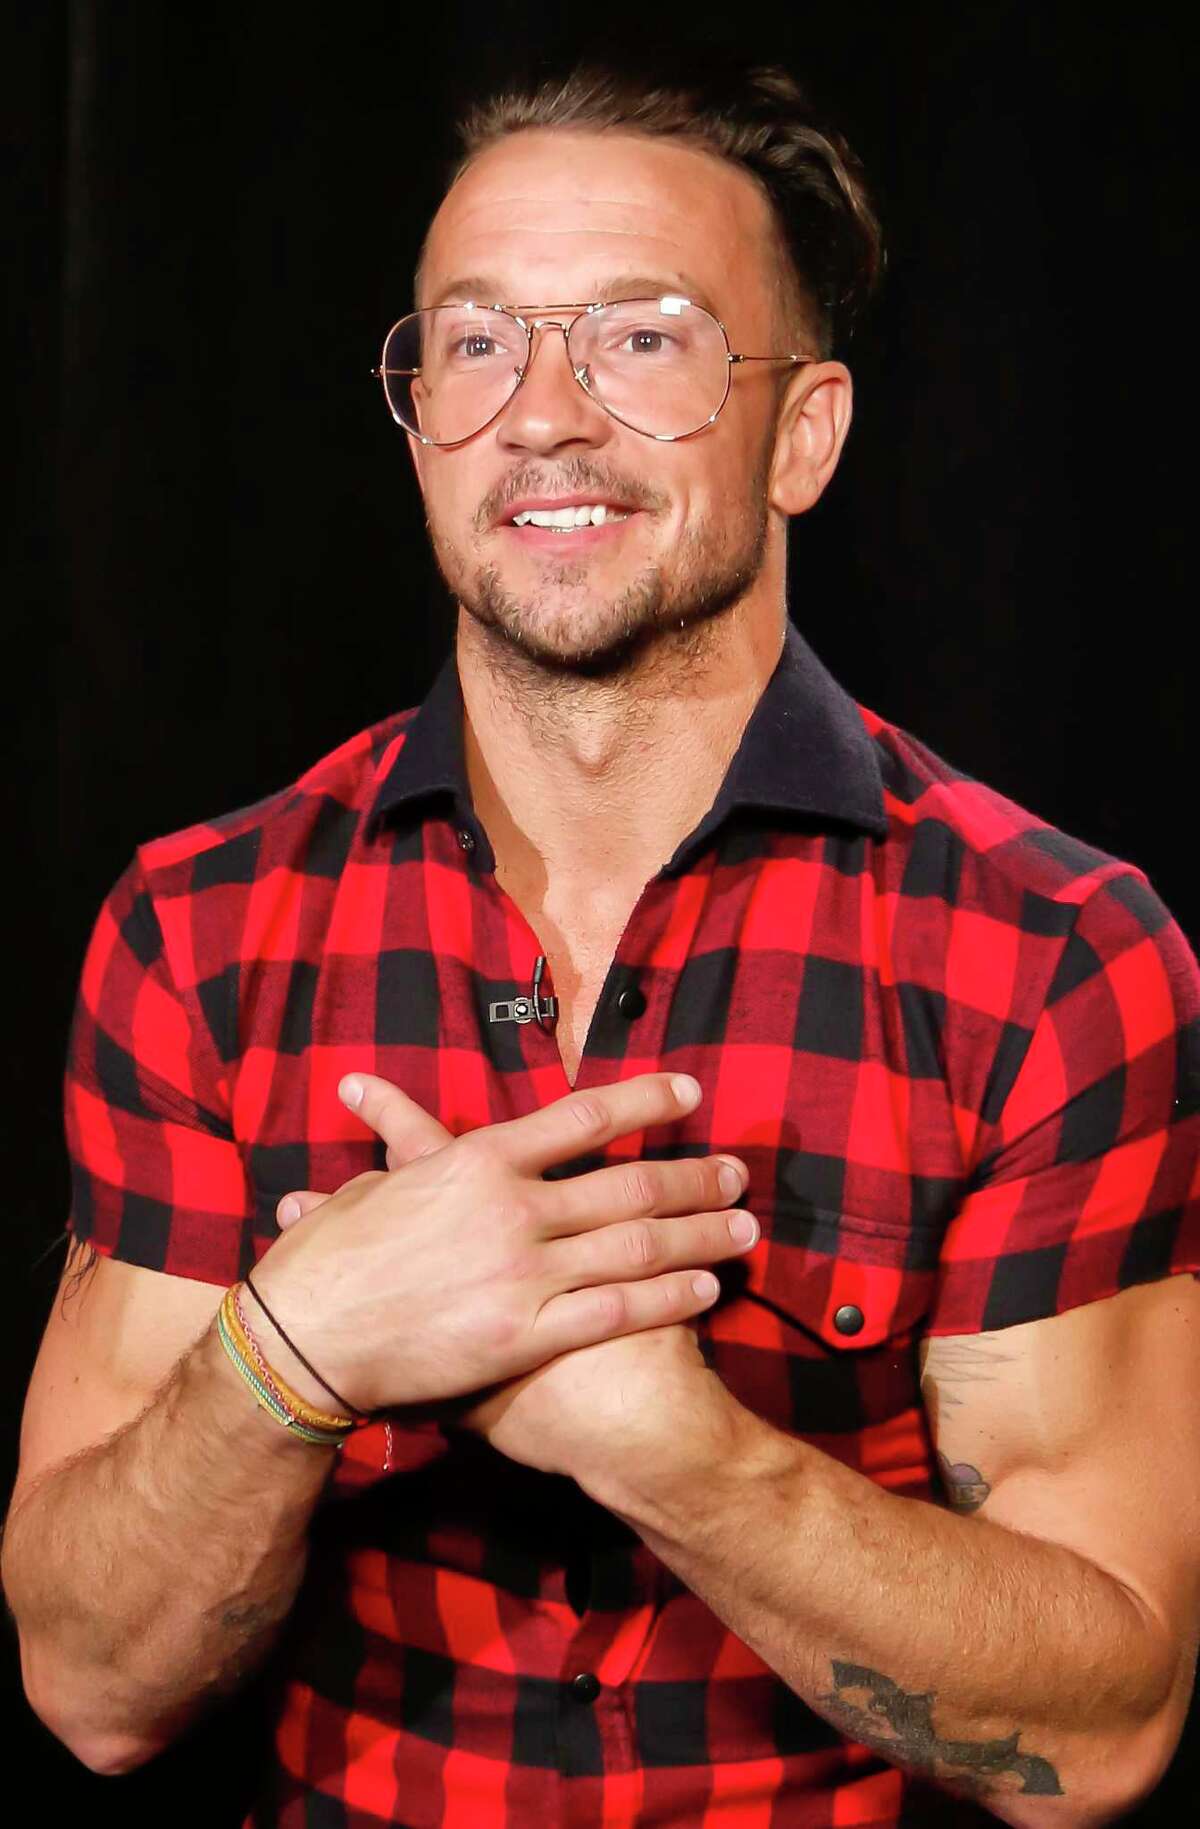 In this Oct. 23, 2017 photo, Carl Lentz, a pastor who ministers to thousands at his Hillsong Church in New York, appears during an interview, in New York. His followers include NBA stars Kyrie Irving, Kevin Durant and popstar Justin Bieber. (AP Photo/Bebeto Matthews)